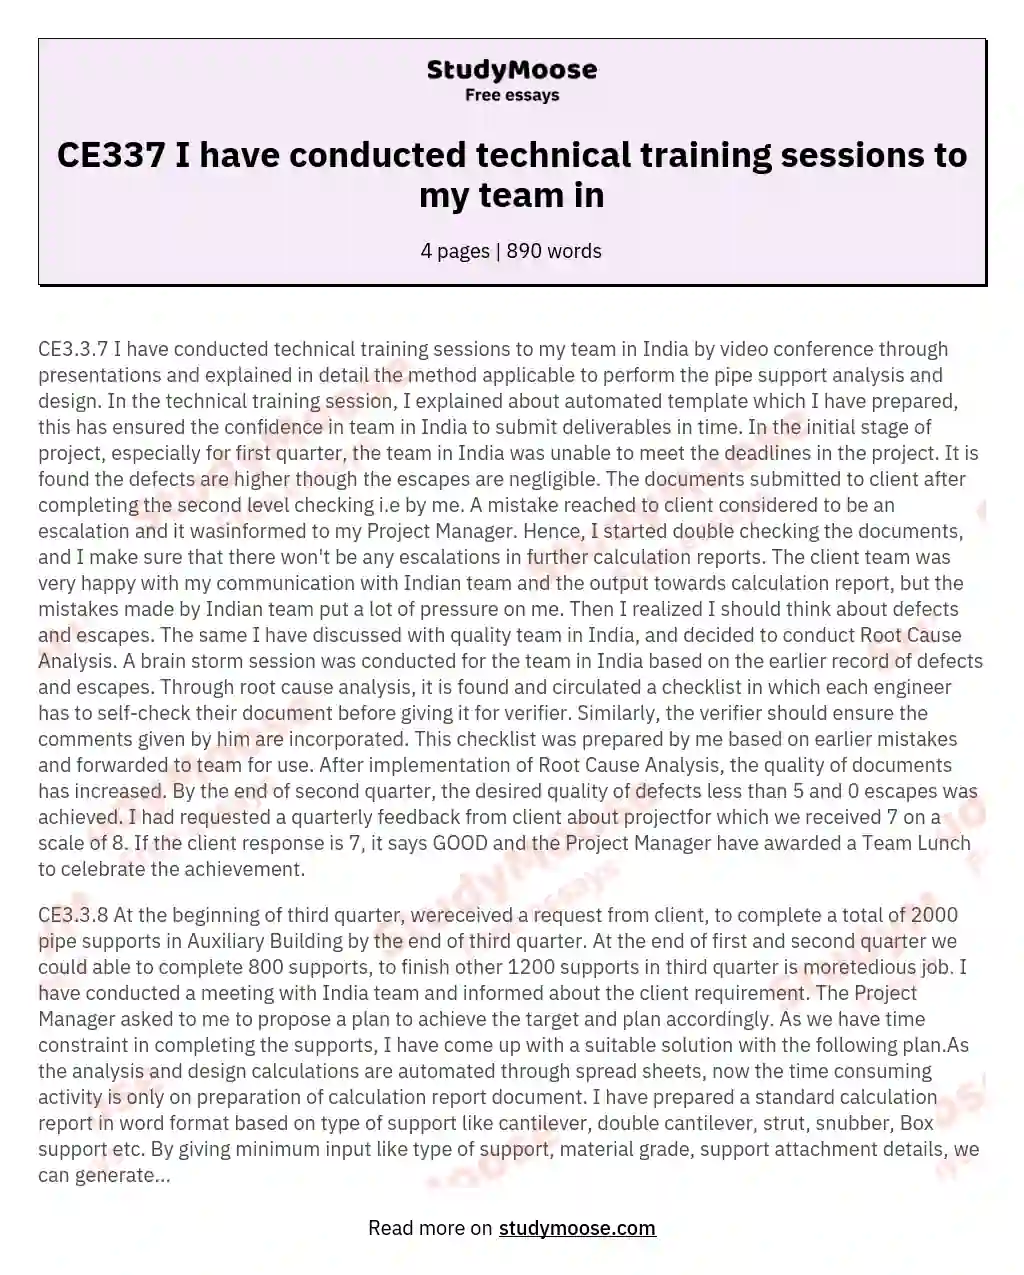 CE337 I have conducted technical training sessions to my team in essay